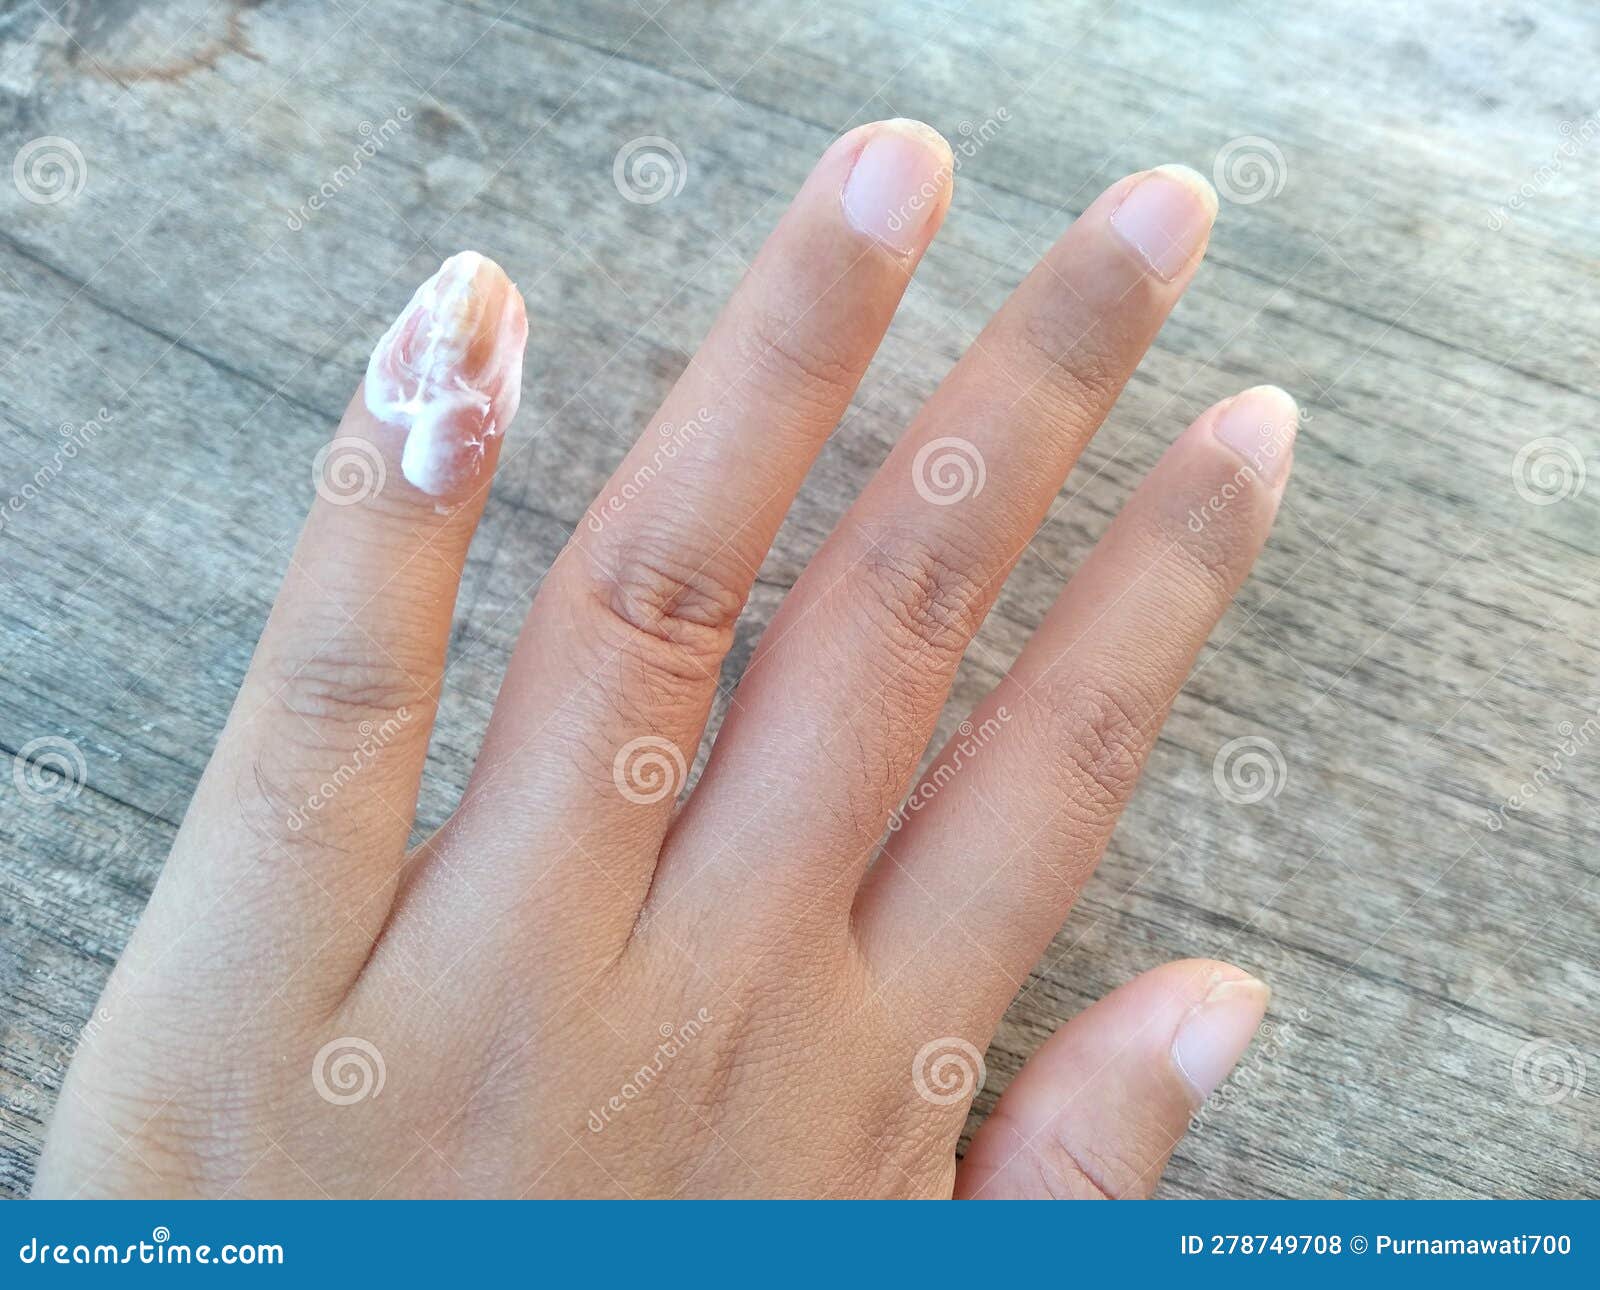 Fingernail Fungus From Acrylic Nails - Prevention, Treatment, Pics & More